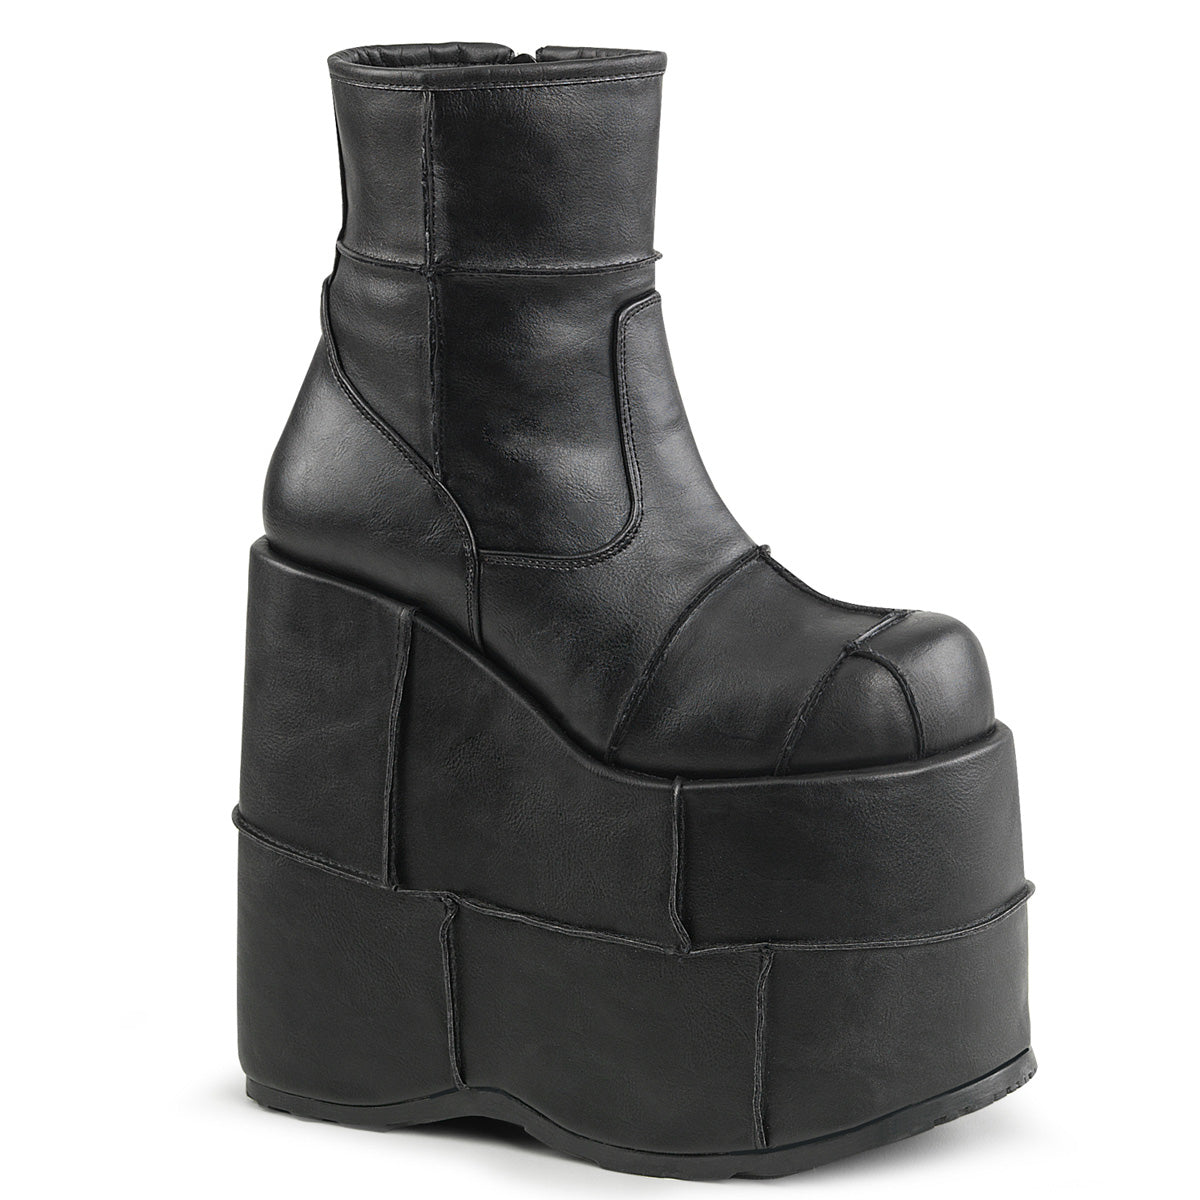 STACK-201 Black Ankle Boots